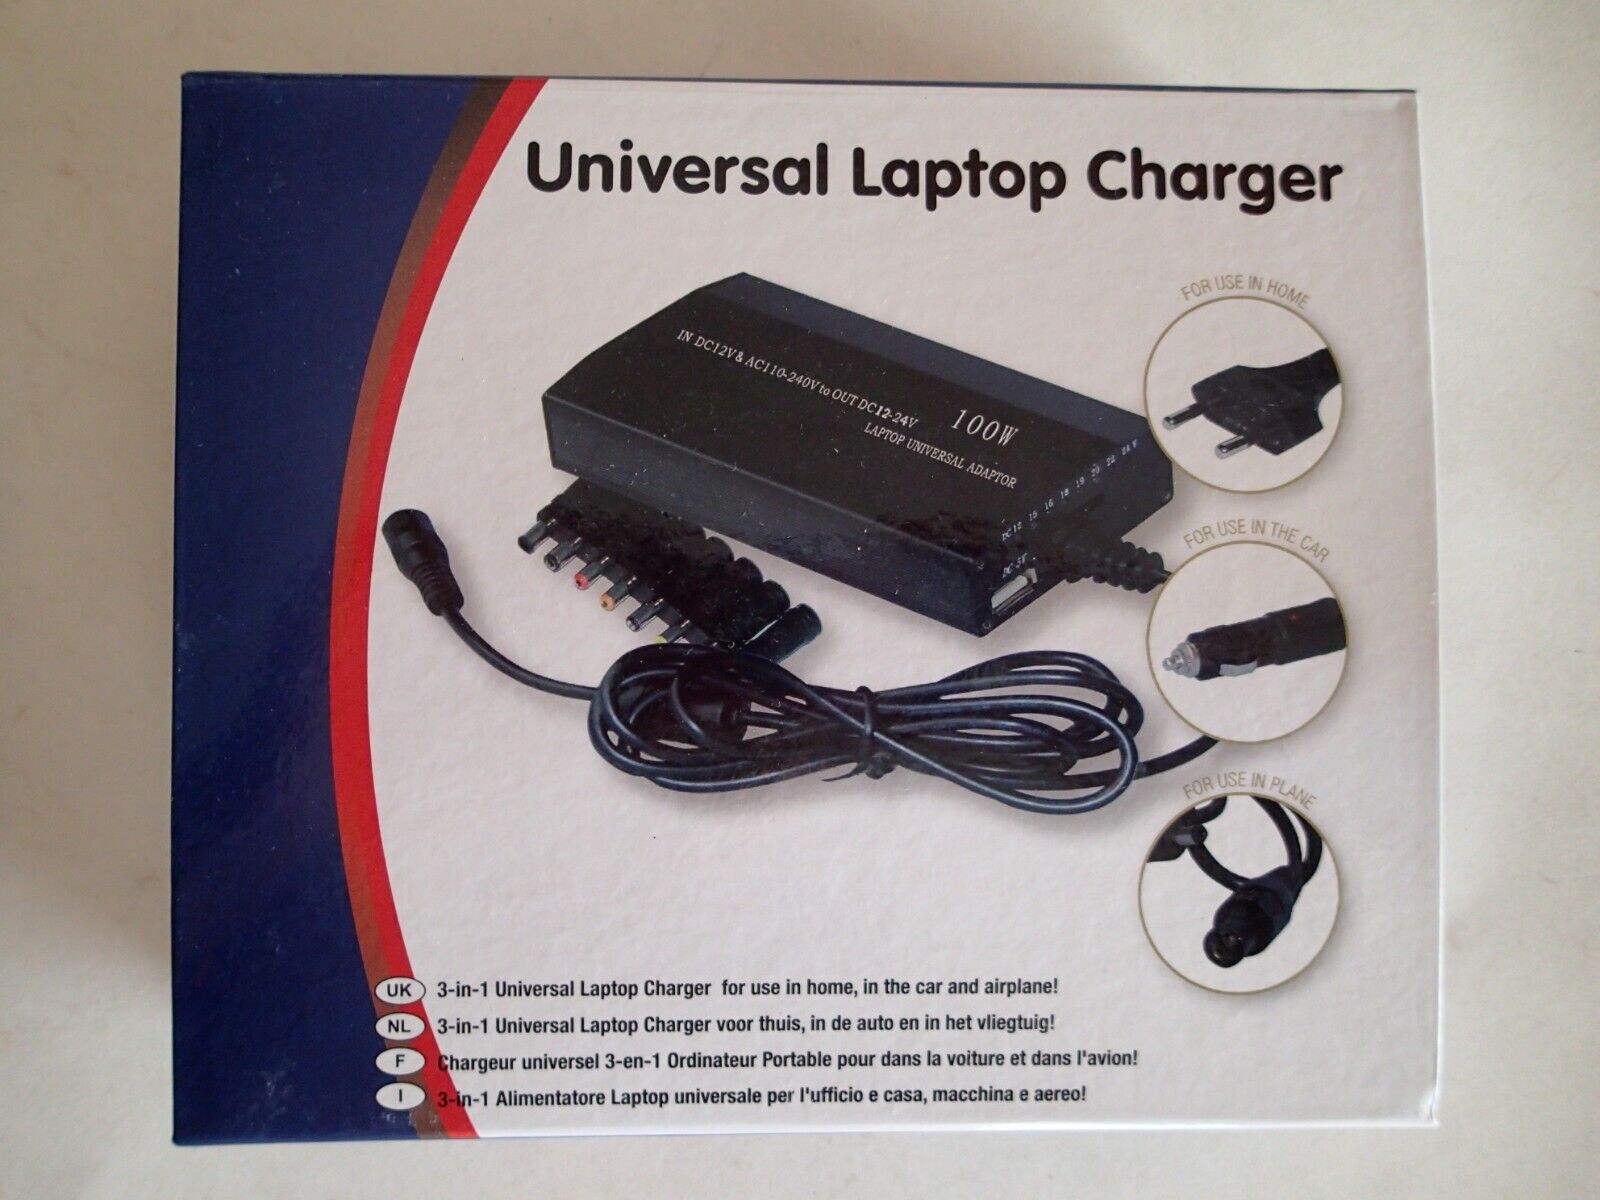 100W 3-in-1 Universal Laptop Charger Adapter For Use in HOME CAR PLANE, Computer